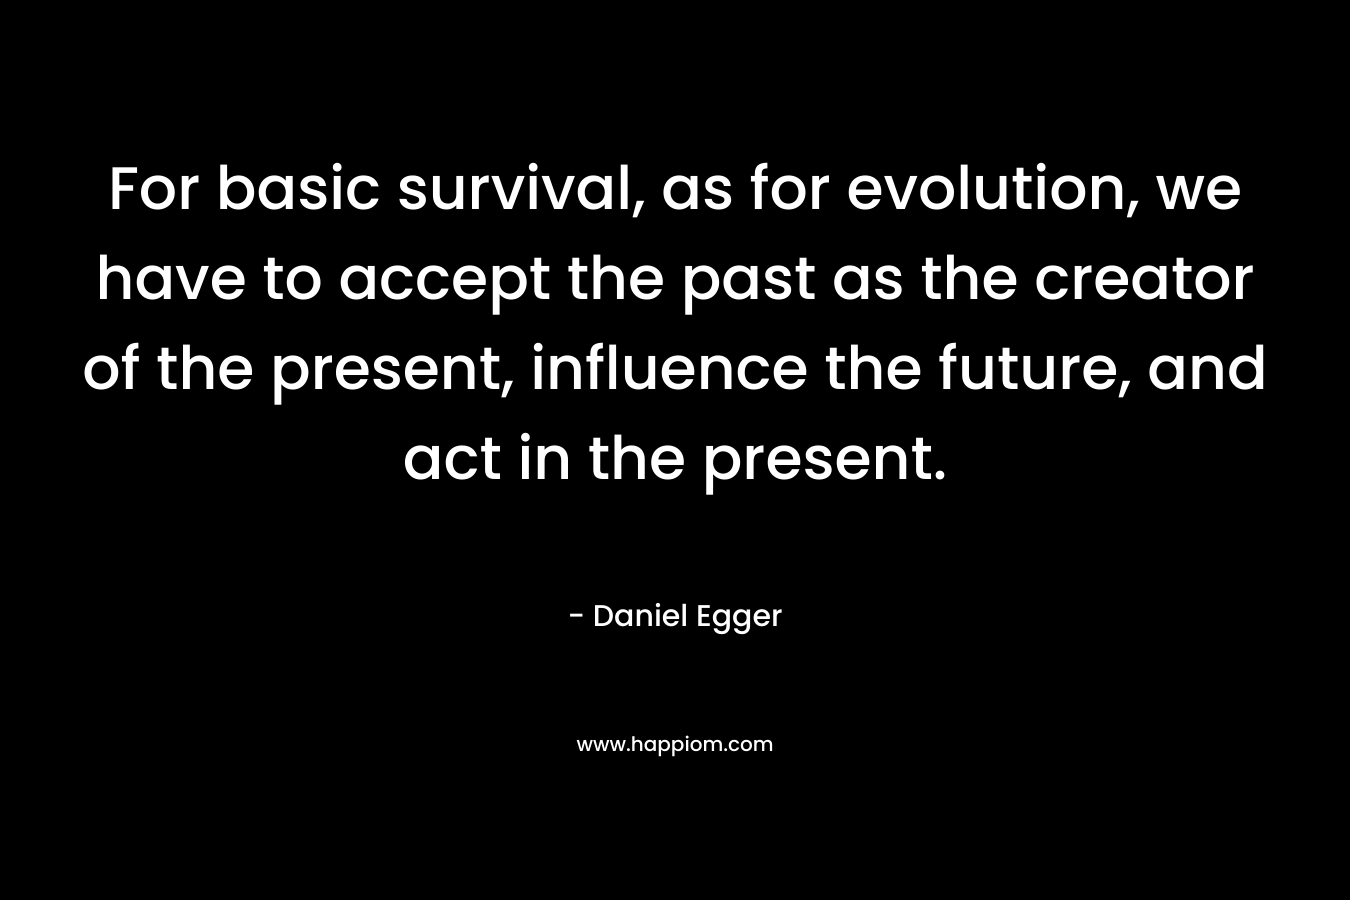 For basic survival, as for evolution, we have to accept the past as the creator of the present, influence the future, and act in the present. – Daniel Egger